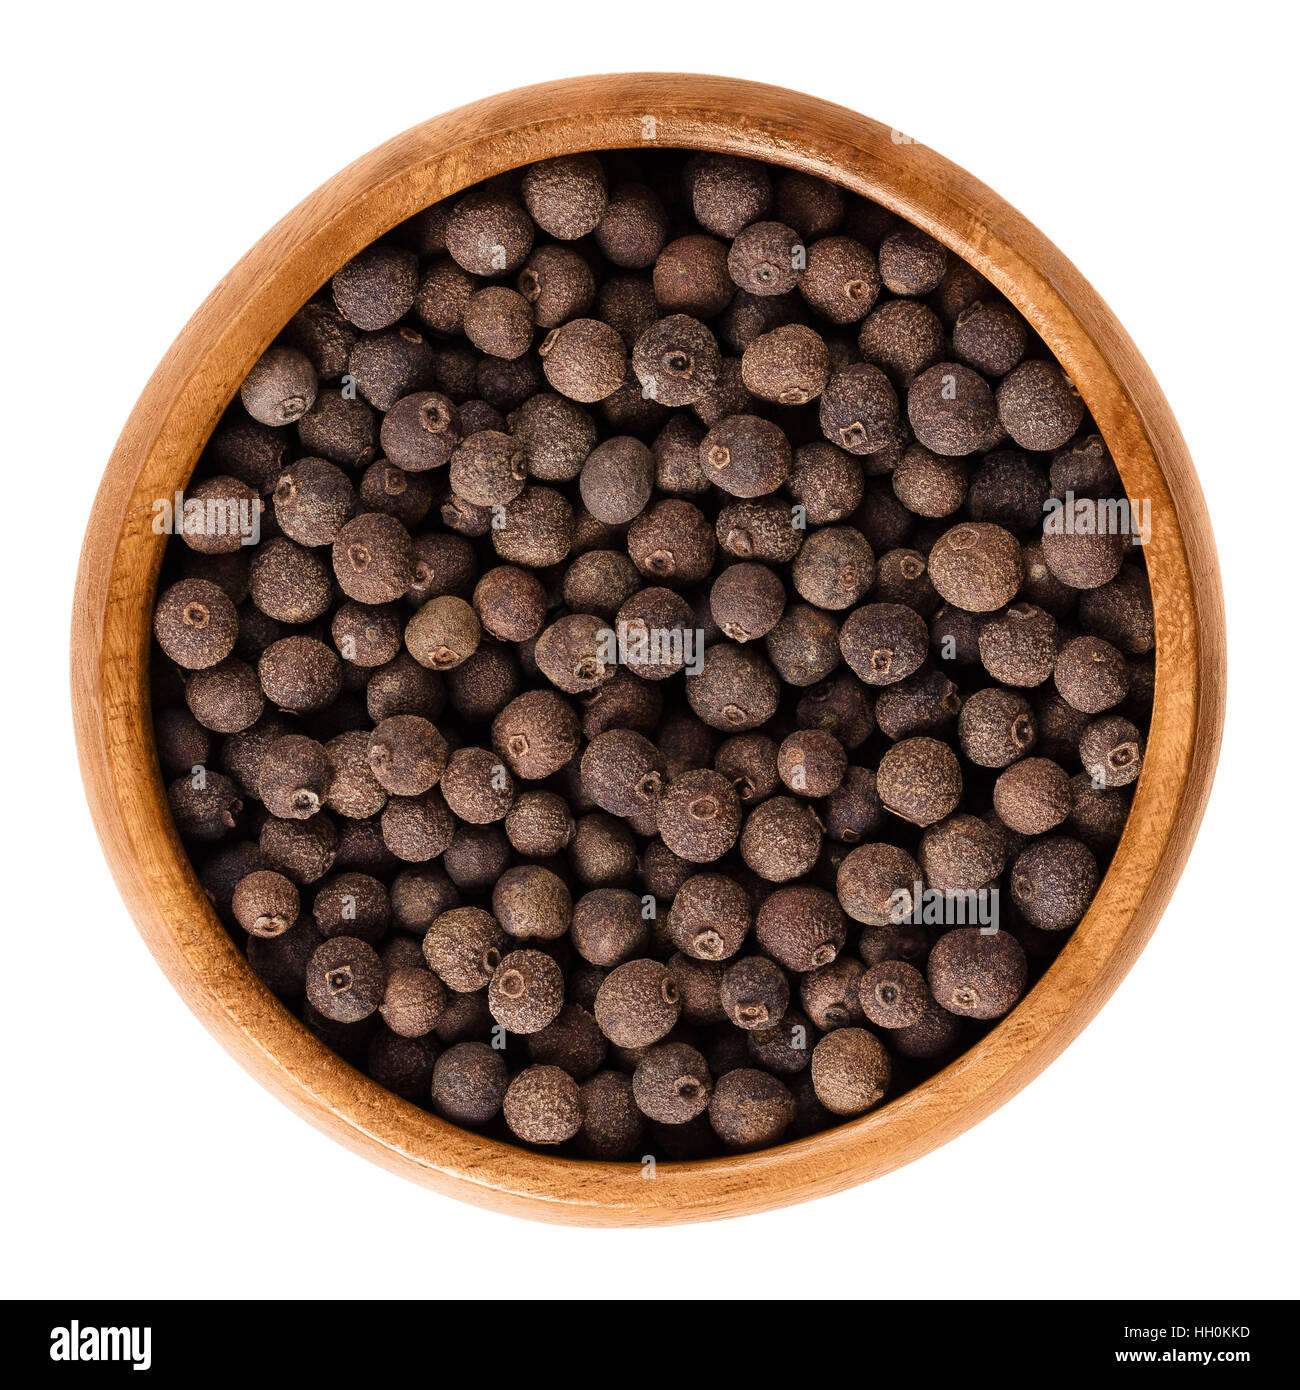 Allspice berries in wooden bowl. Dried unripe fruit, used as spice. Jamaica or myrtle pepper, Turkish yenibahar or newspice. Stock Photo